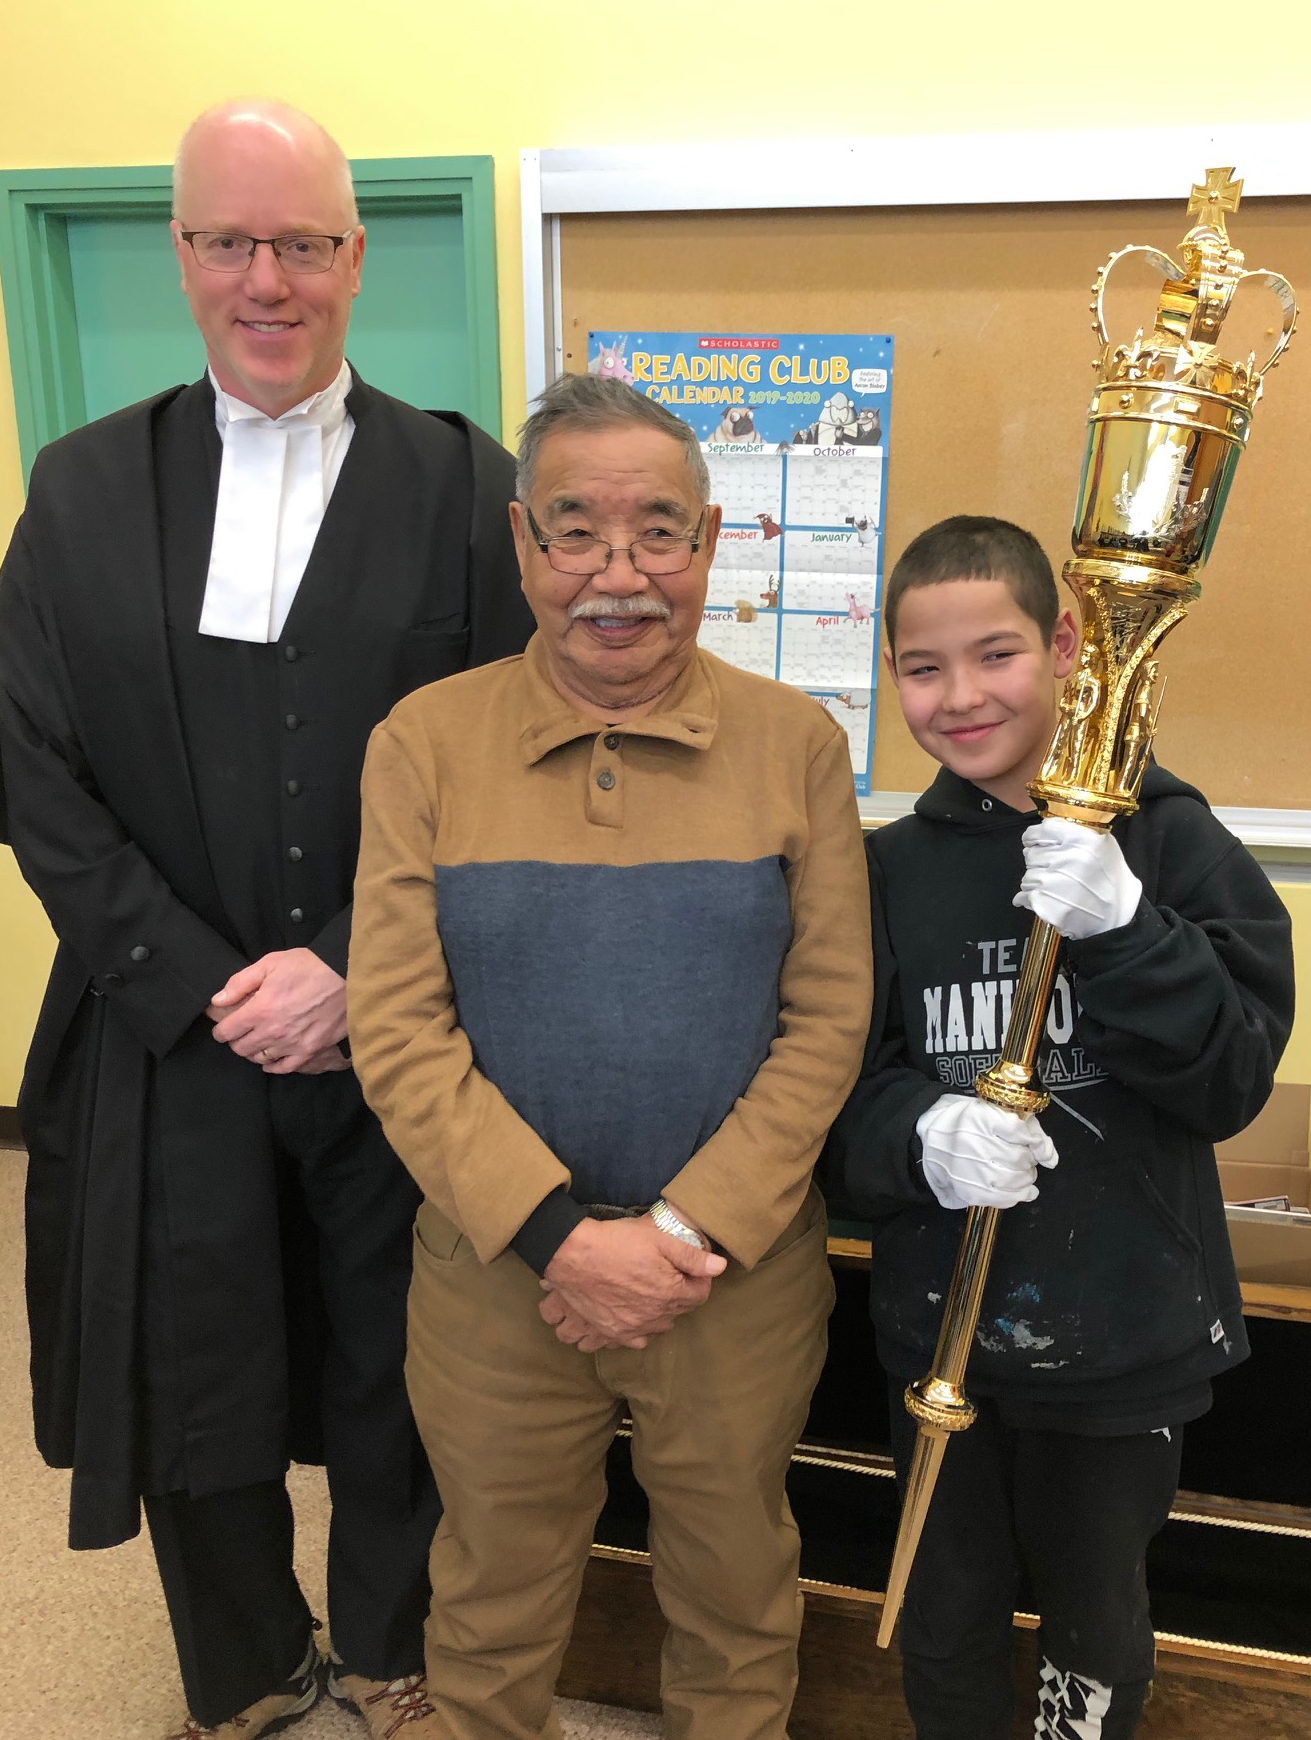 Sam Johnston, his grandson Seth Netro, and the Hon. Nils Clarke are pictured with Seth holding the Mace